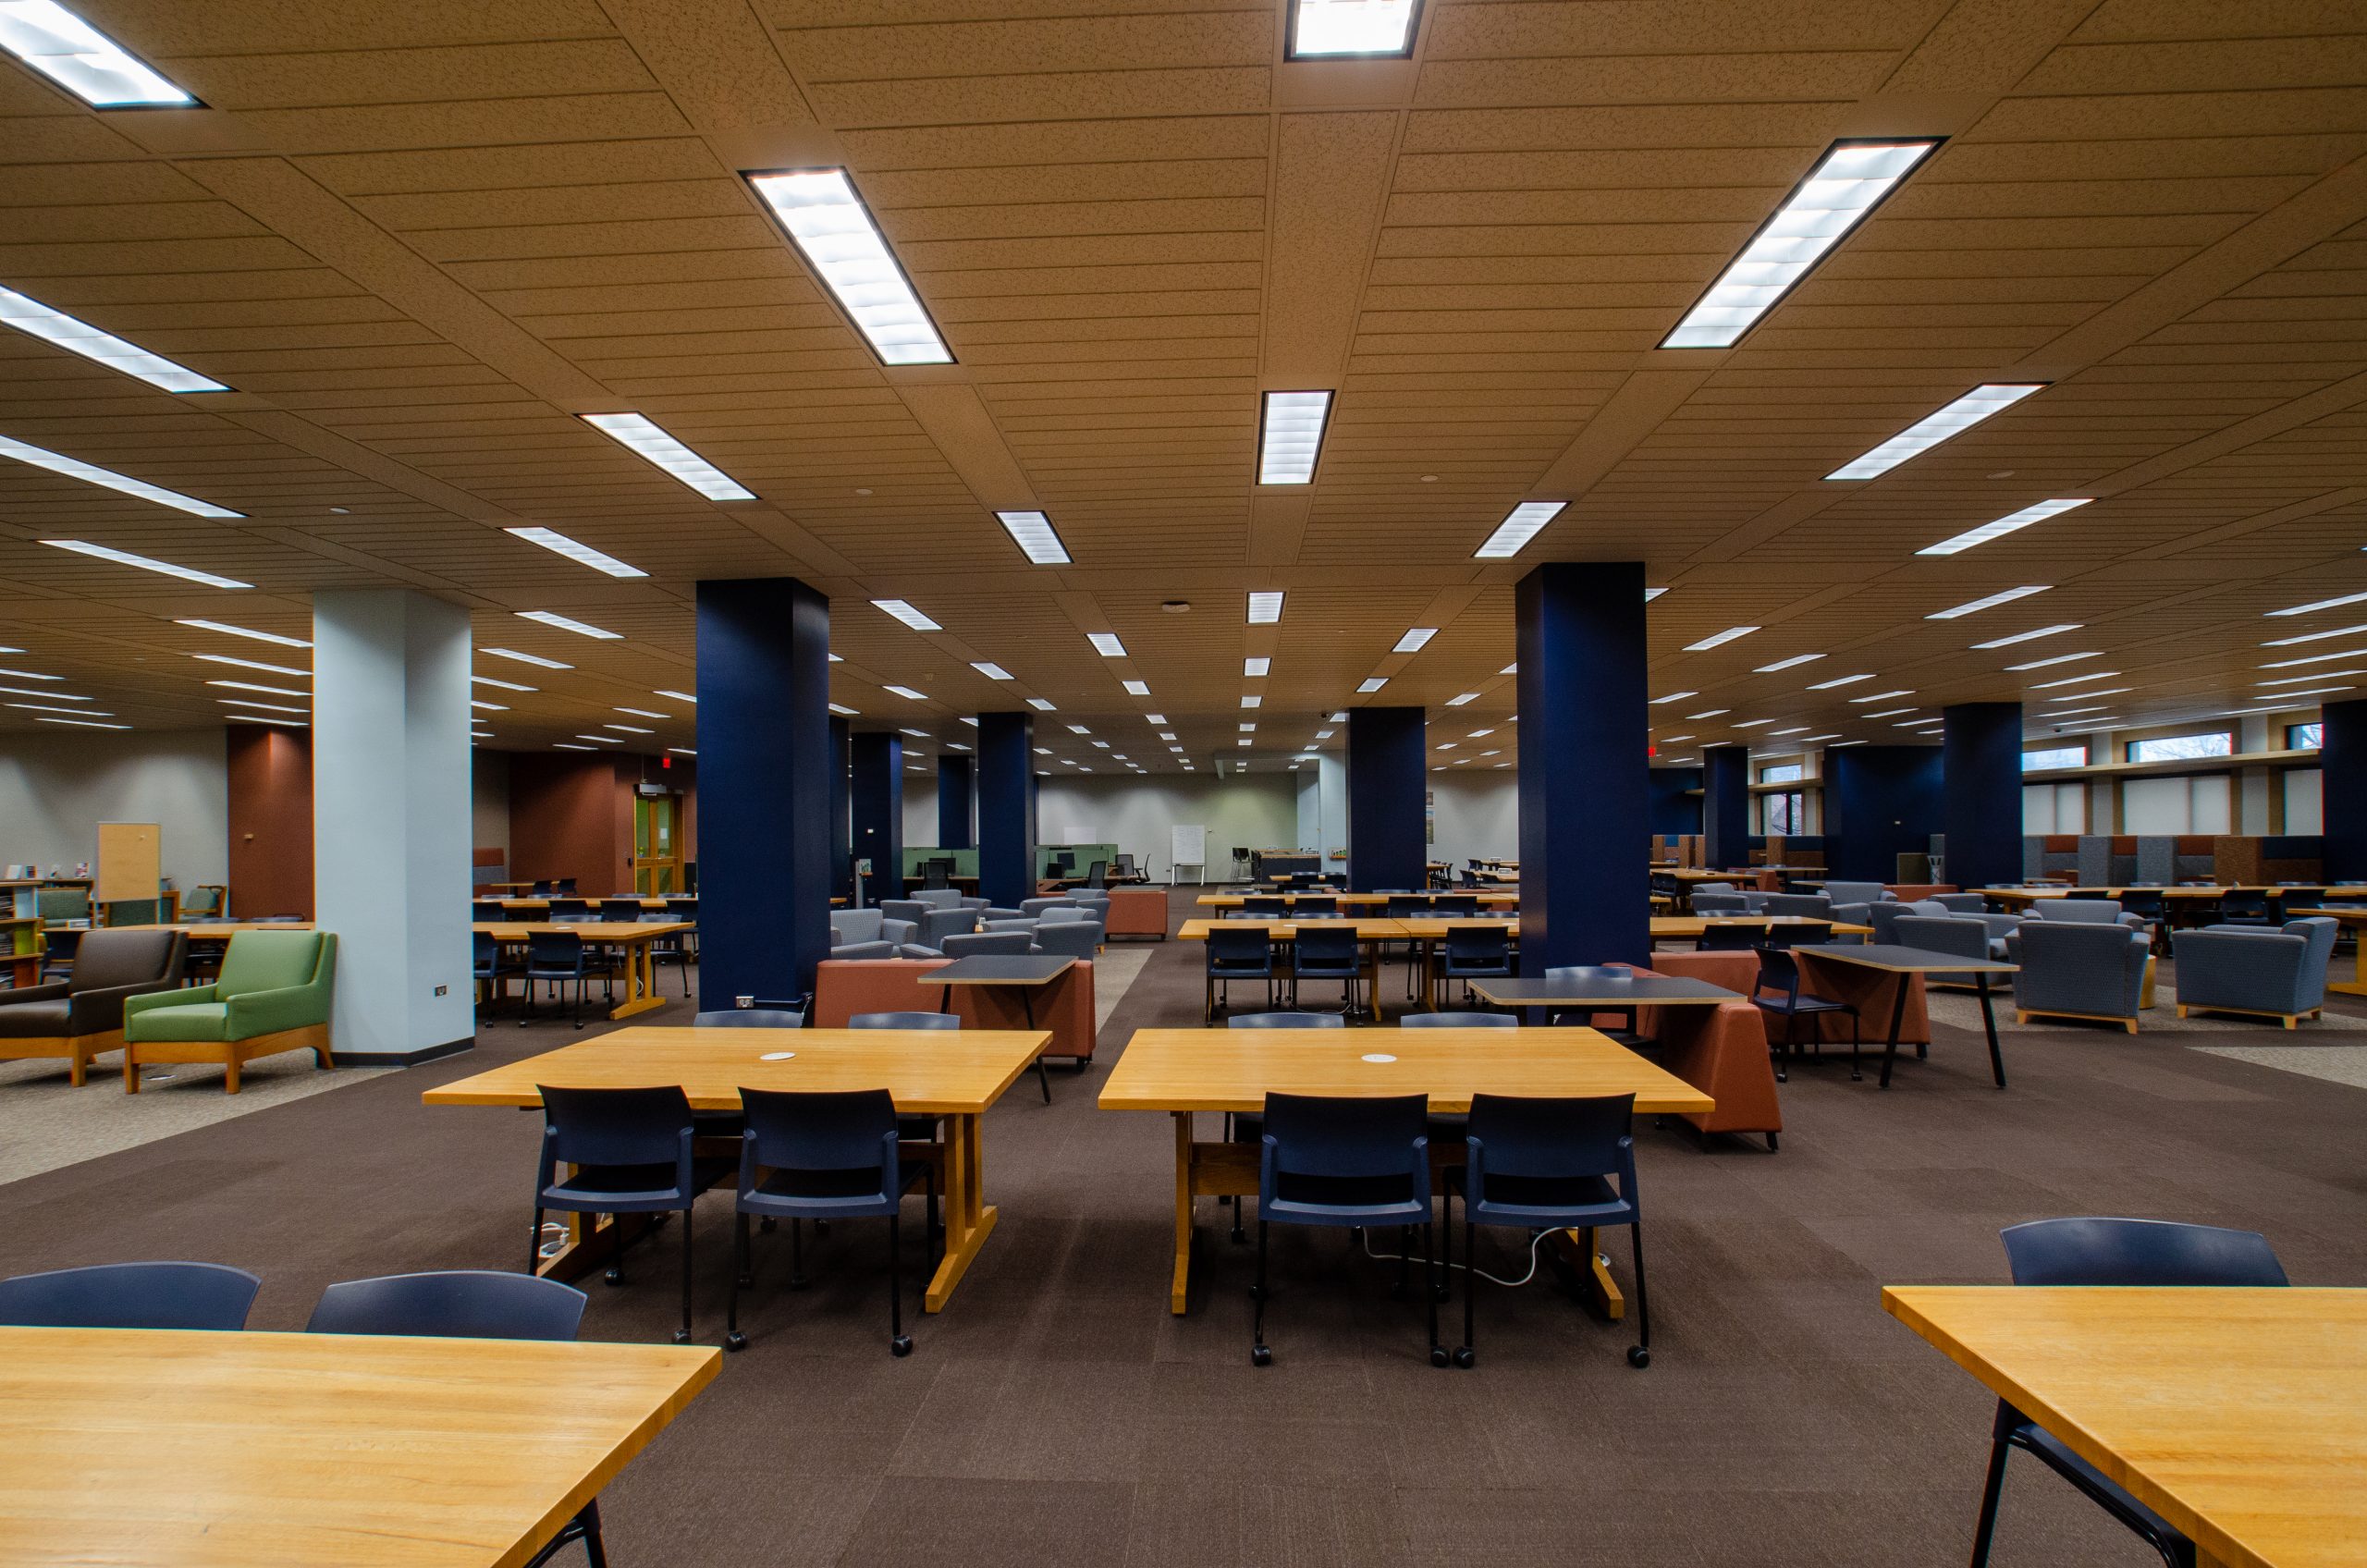 Paul M. and Marion T. Miles Reading Room at hodges library - university of tennessee